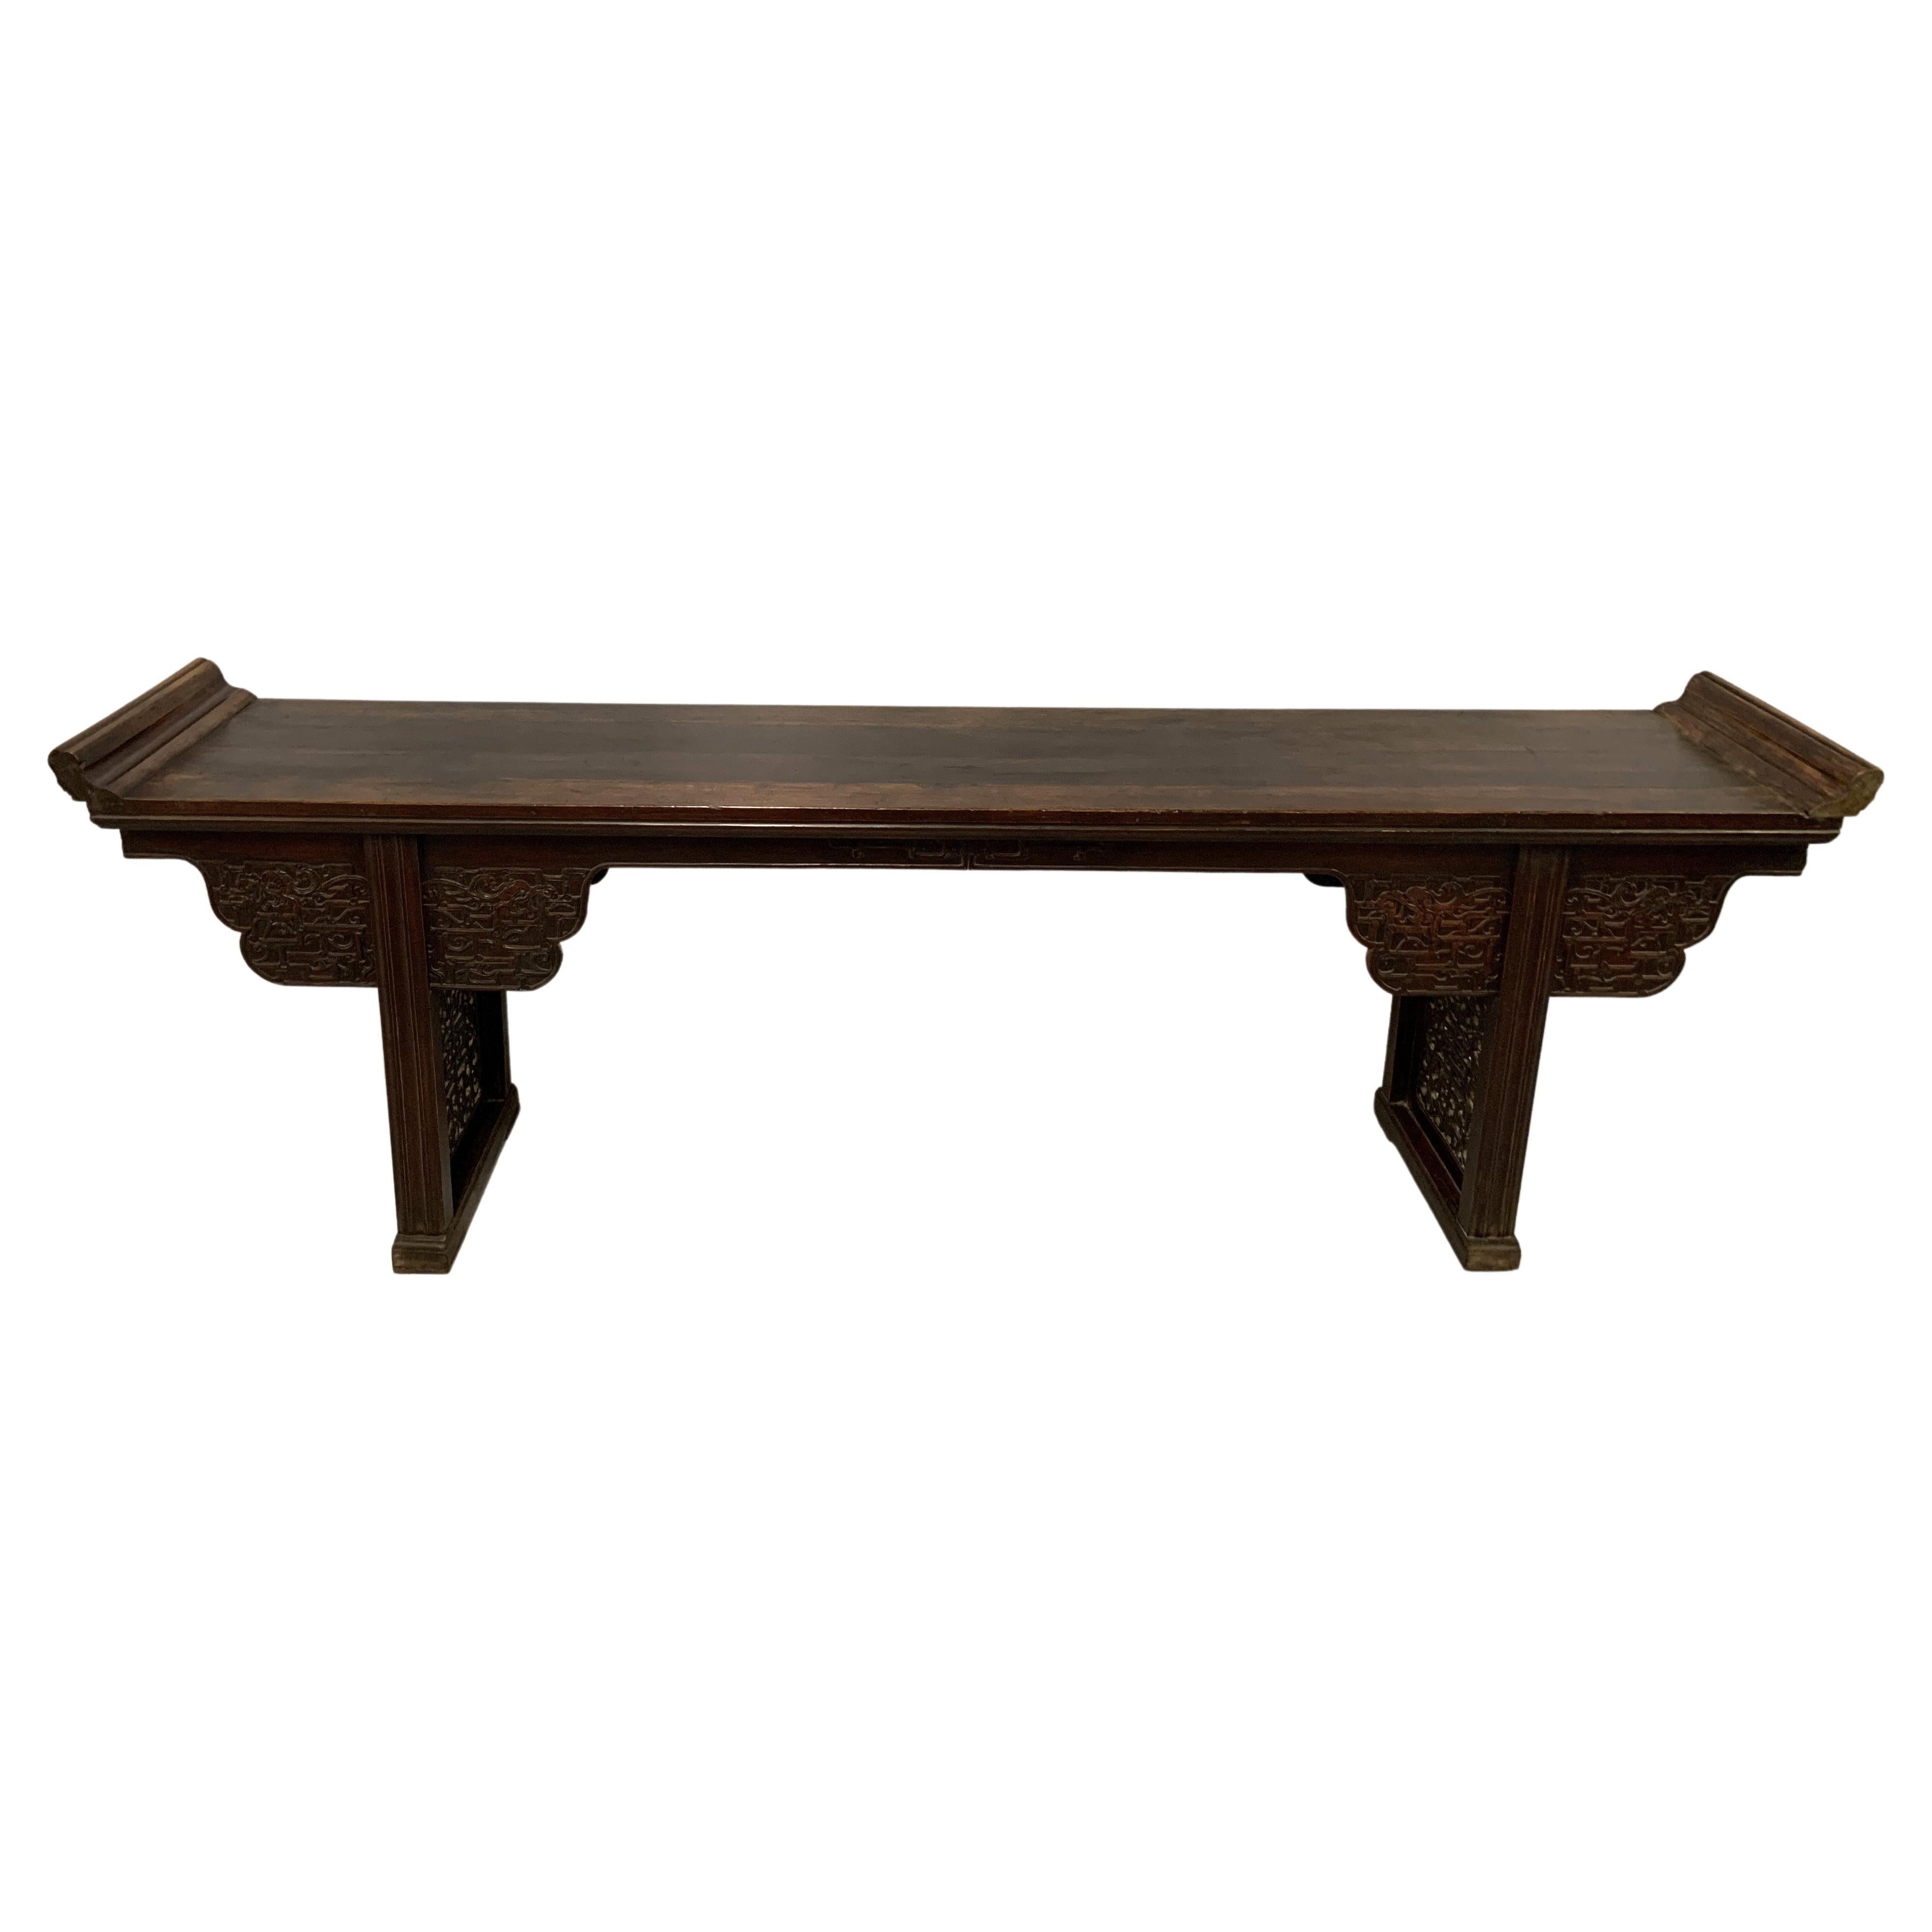 A large finely carved elmwood Chinese alter table from the late 19th century. The top is a solid piece of old grown elmwood and the table has a wonderful old patina. This table is highly decorative and functional as it is very narrow and long, a